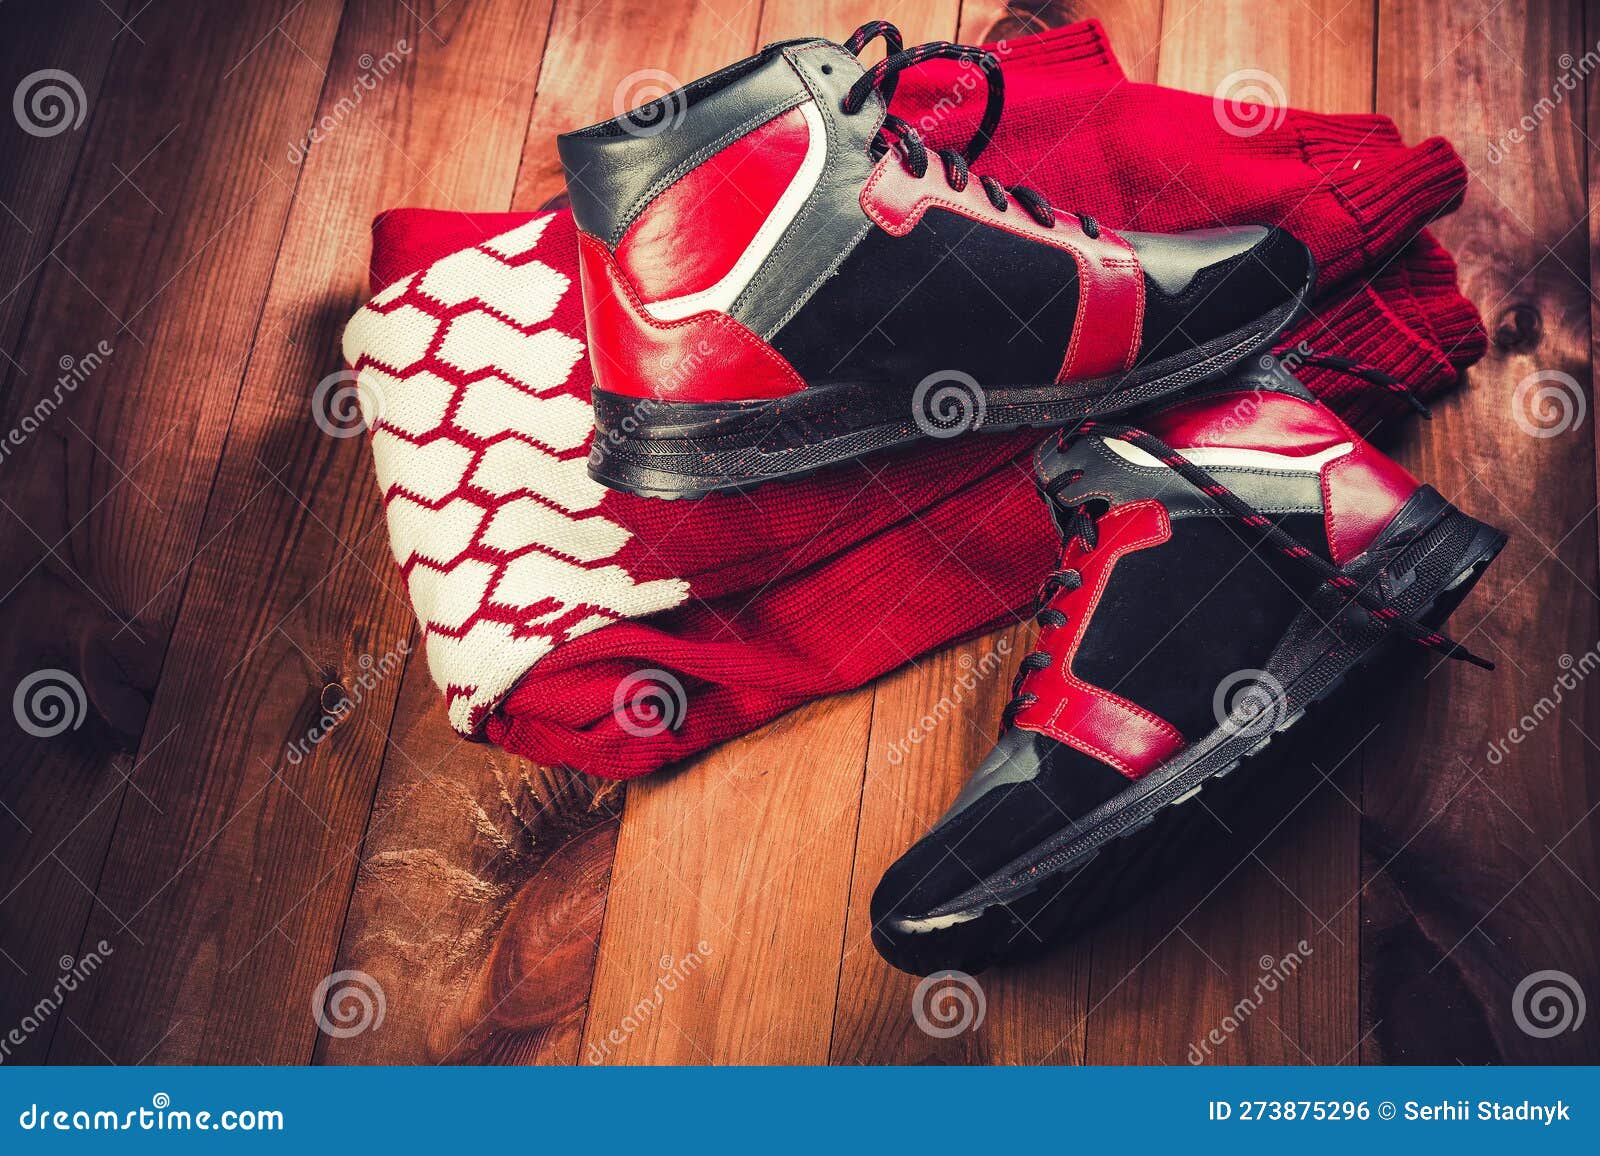 Red Men S Shoes on a Wooden Background Stock Photo - Image of fashion ...